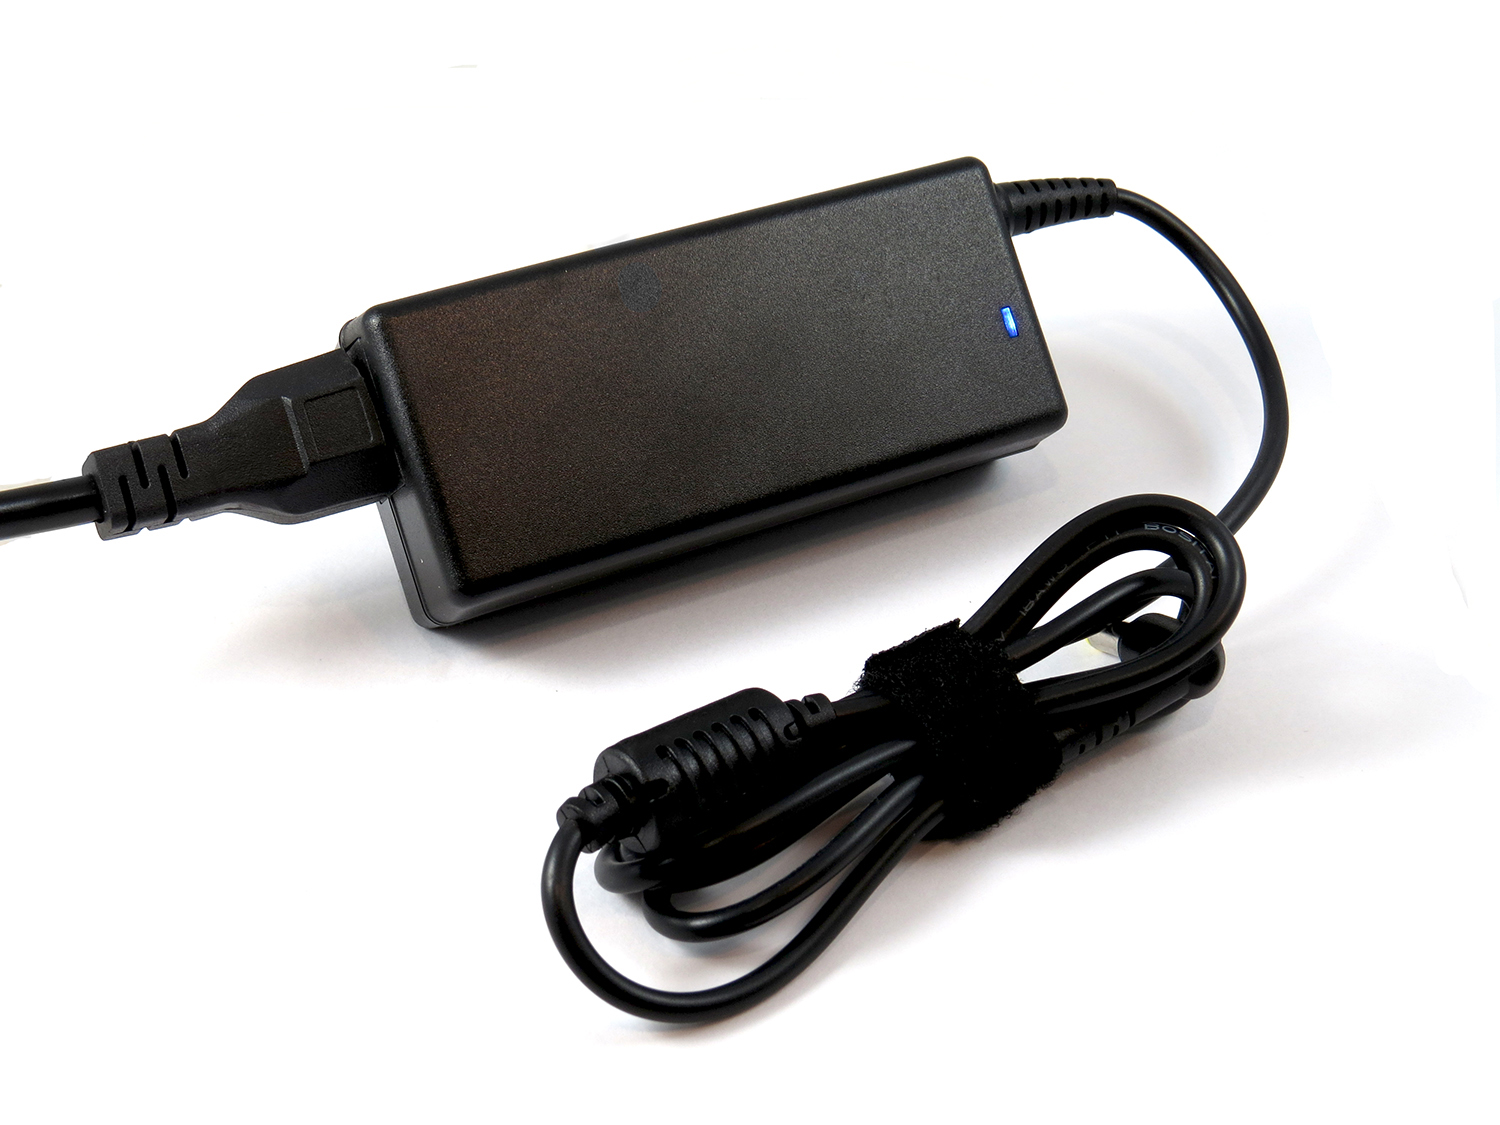 AMSK POWER AC Adapter for Samsung XE700T1A XE700T1A-A01US XE700T1A-A02US XE700T1A-A03US XE700T1A-A04US XE700T1A-A05US XE700T1A-A06US XE700T1A-A07US - image 2 of 3